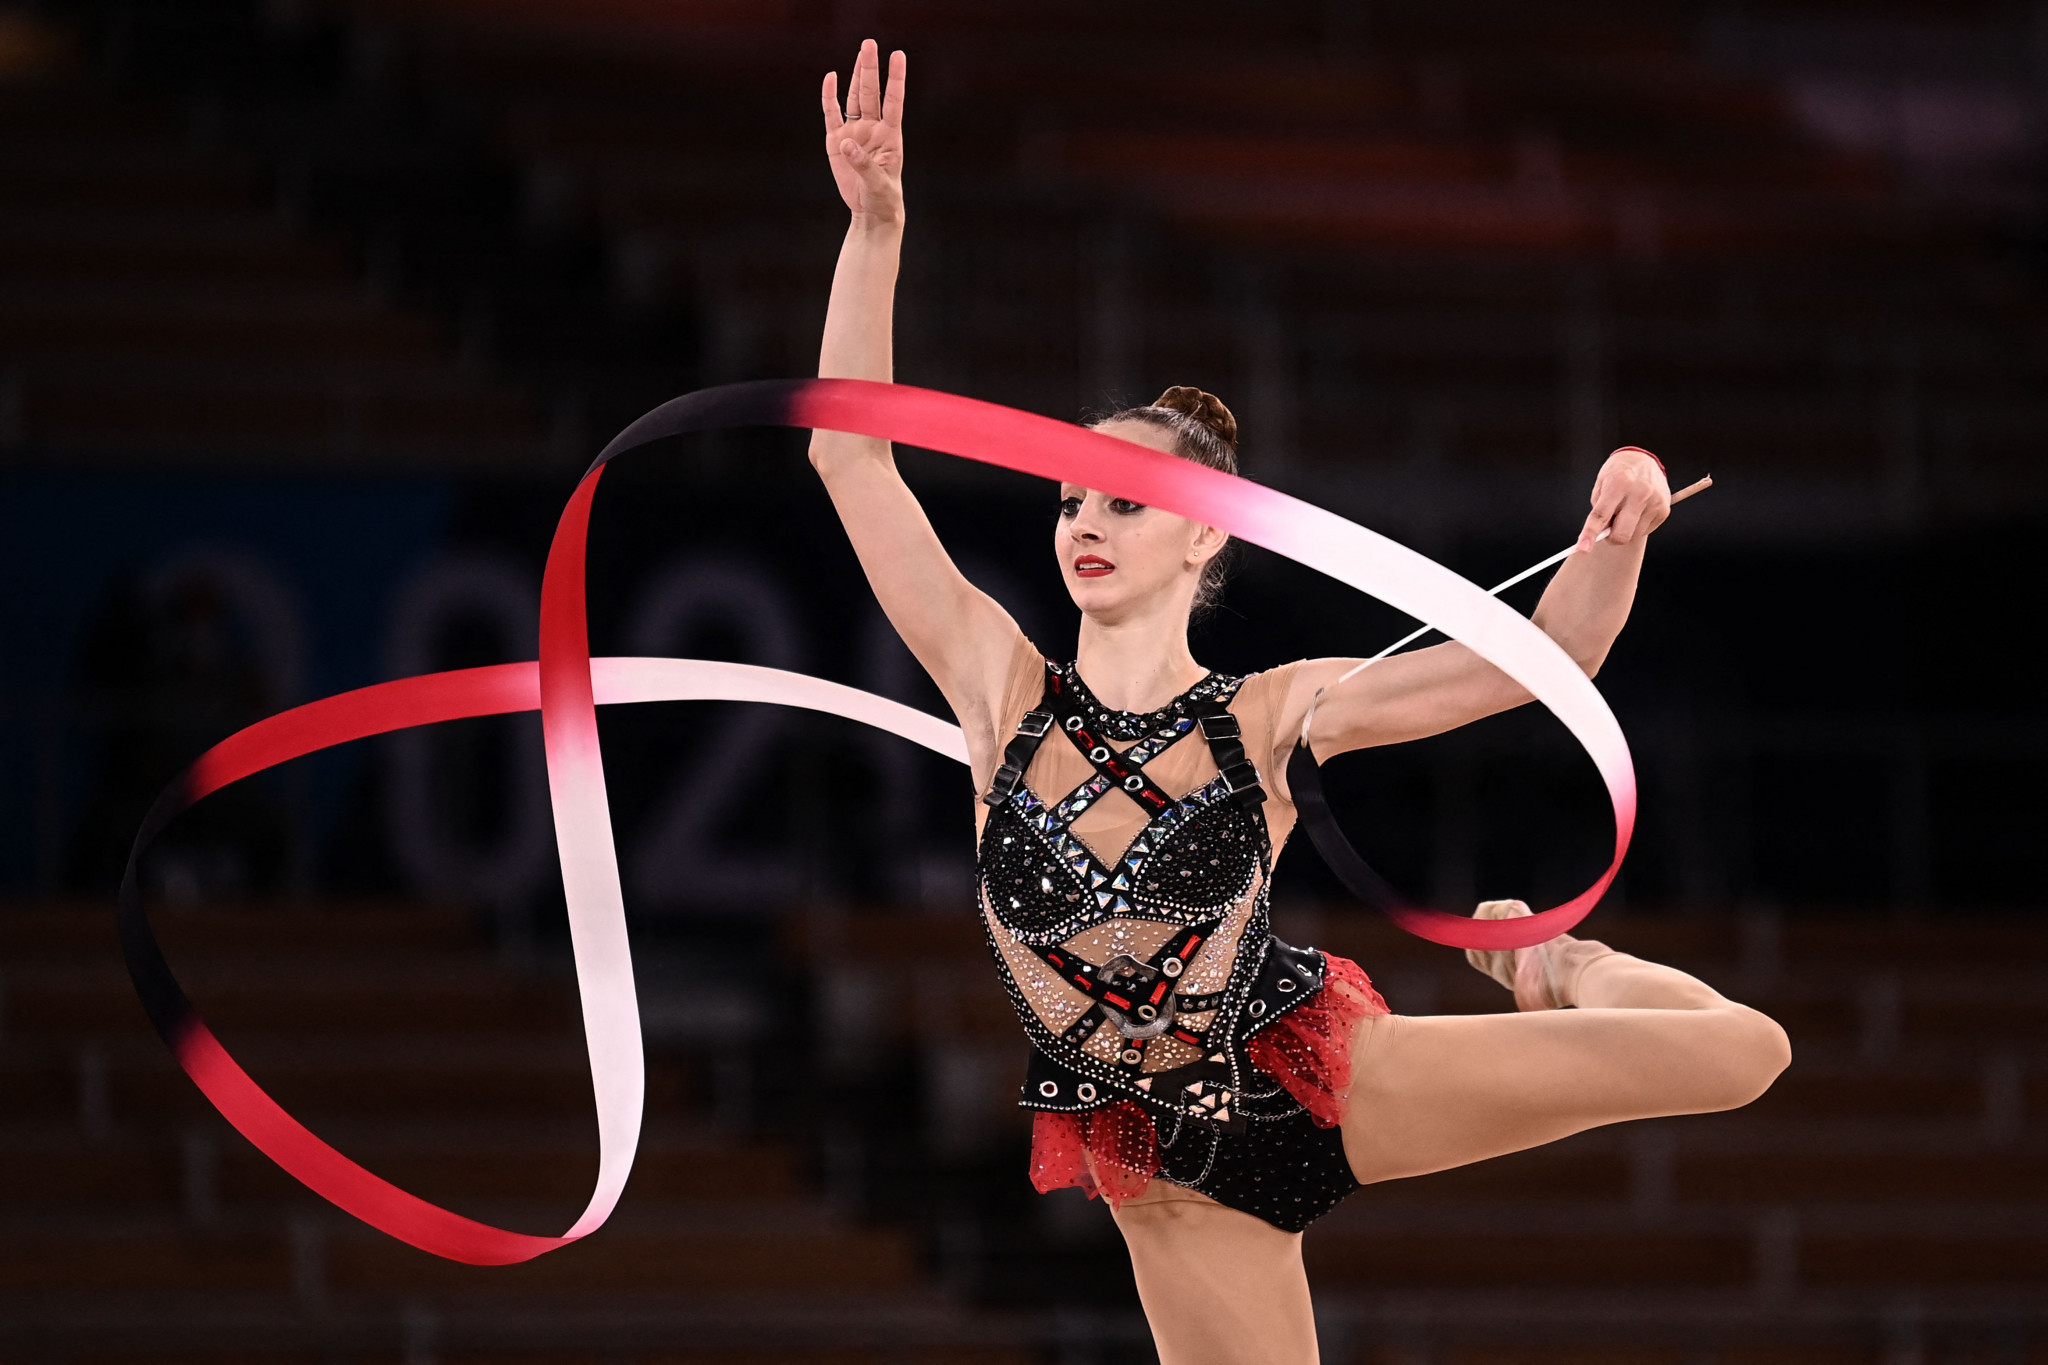 Boryana Kaleyn achieved gold in the all-around event at the FIG World Challenge Cup ©Getty Images